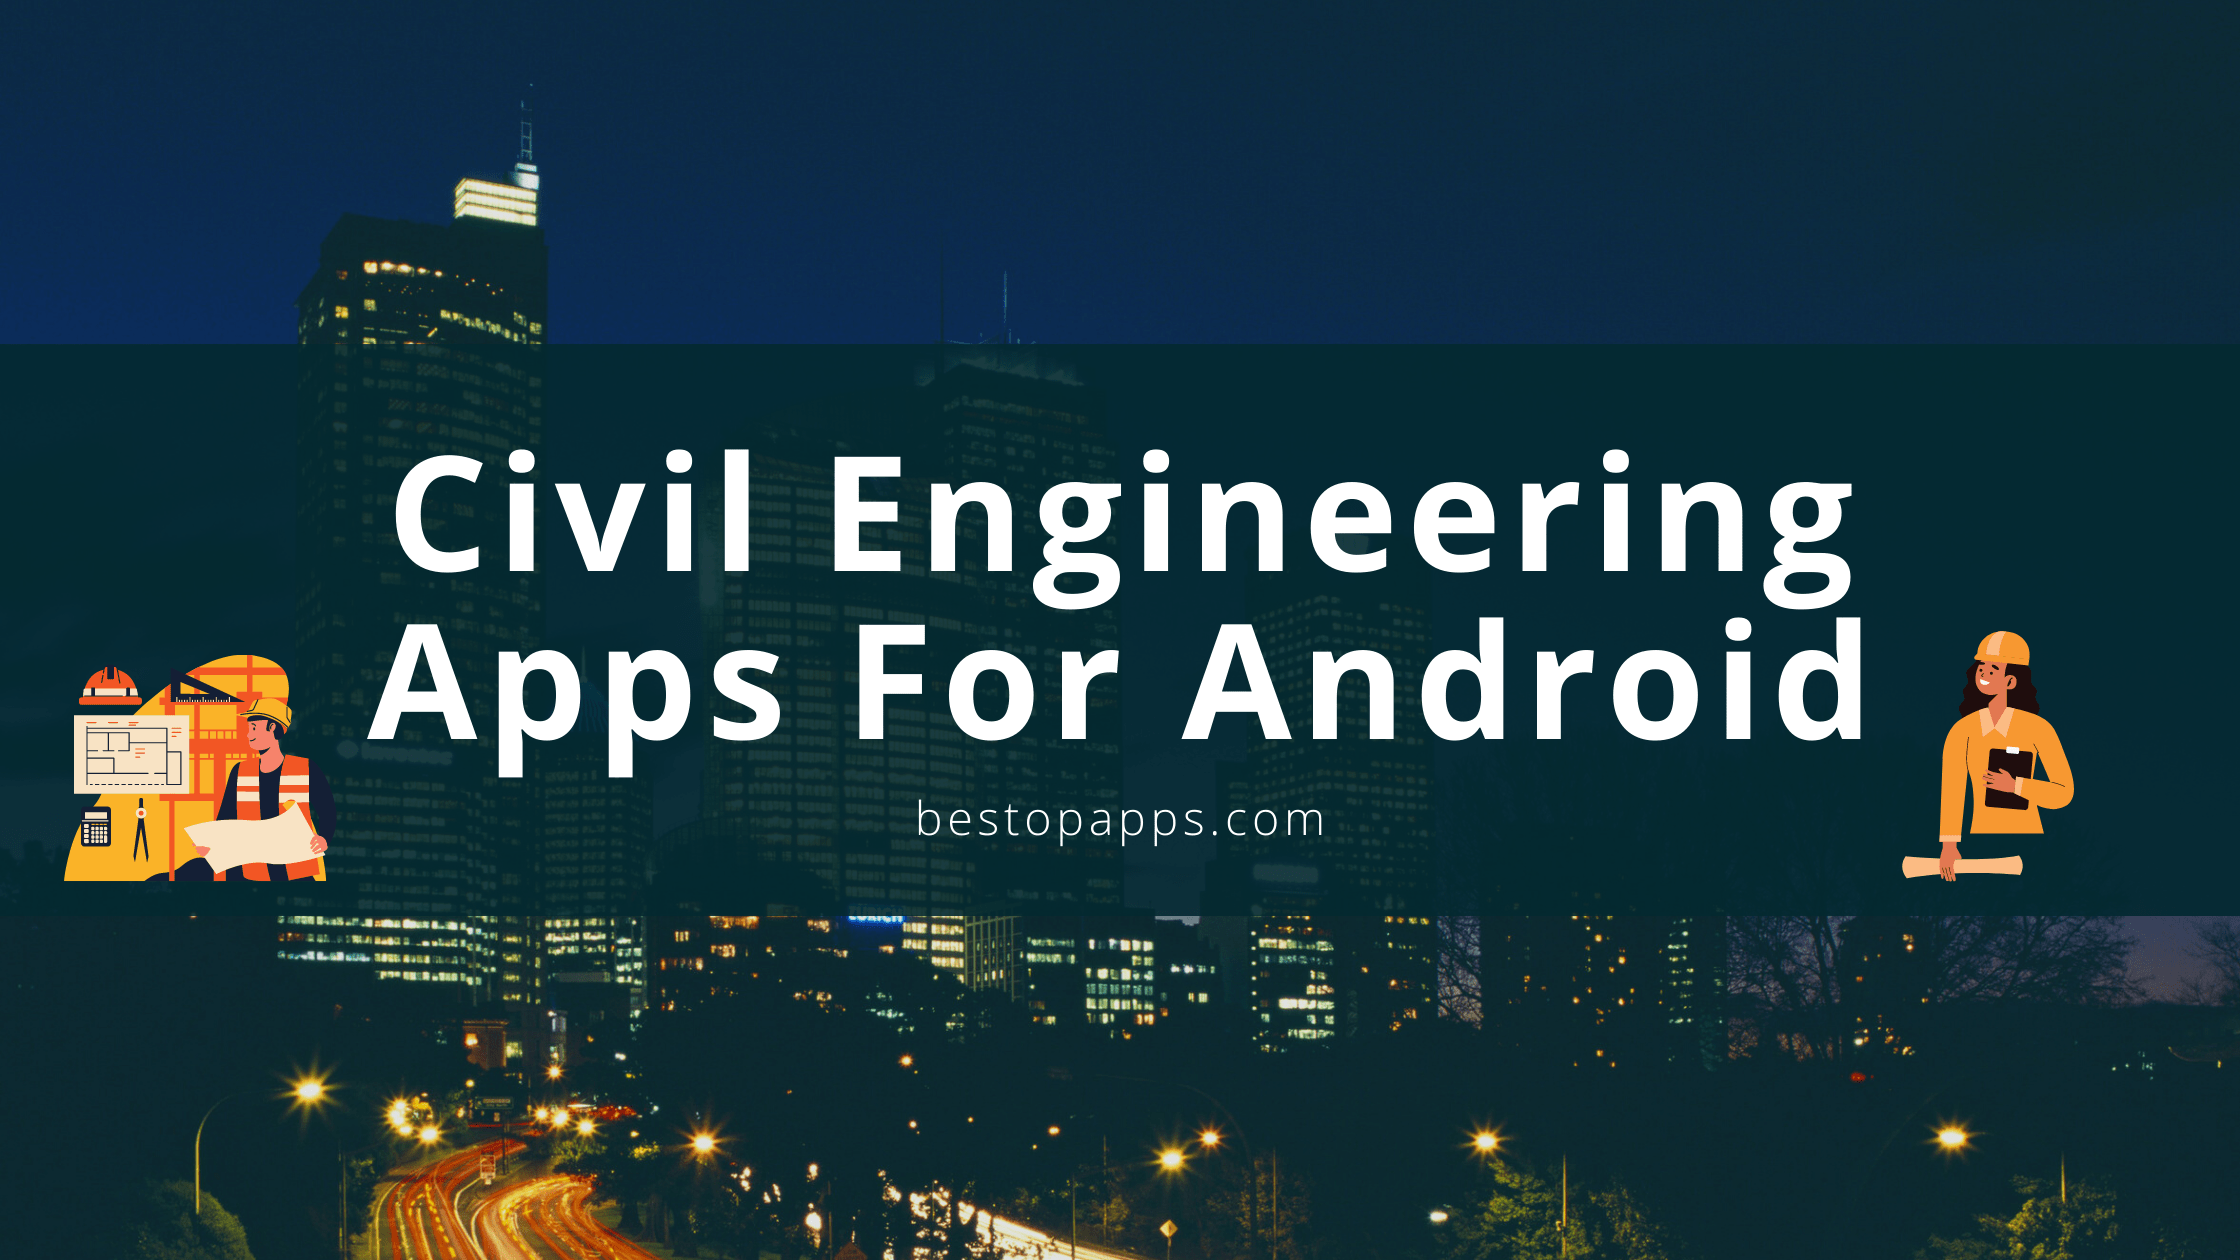 Civil Engineering Apps For Android